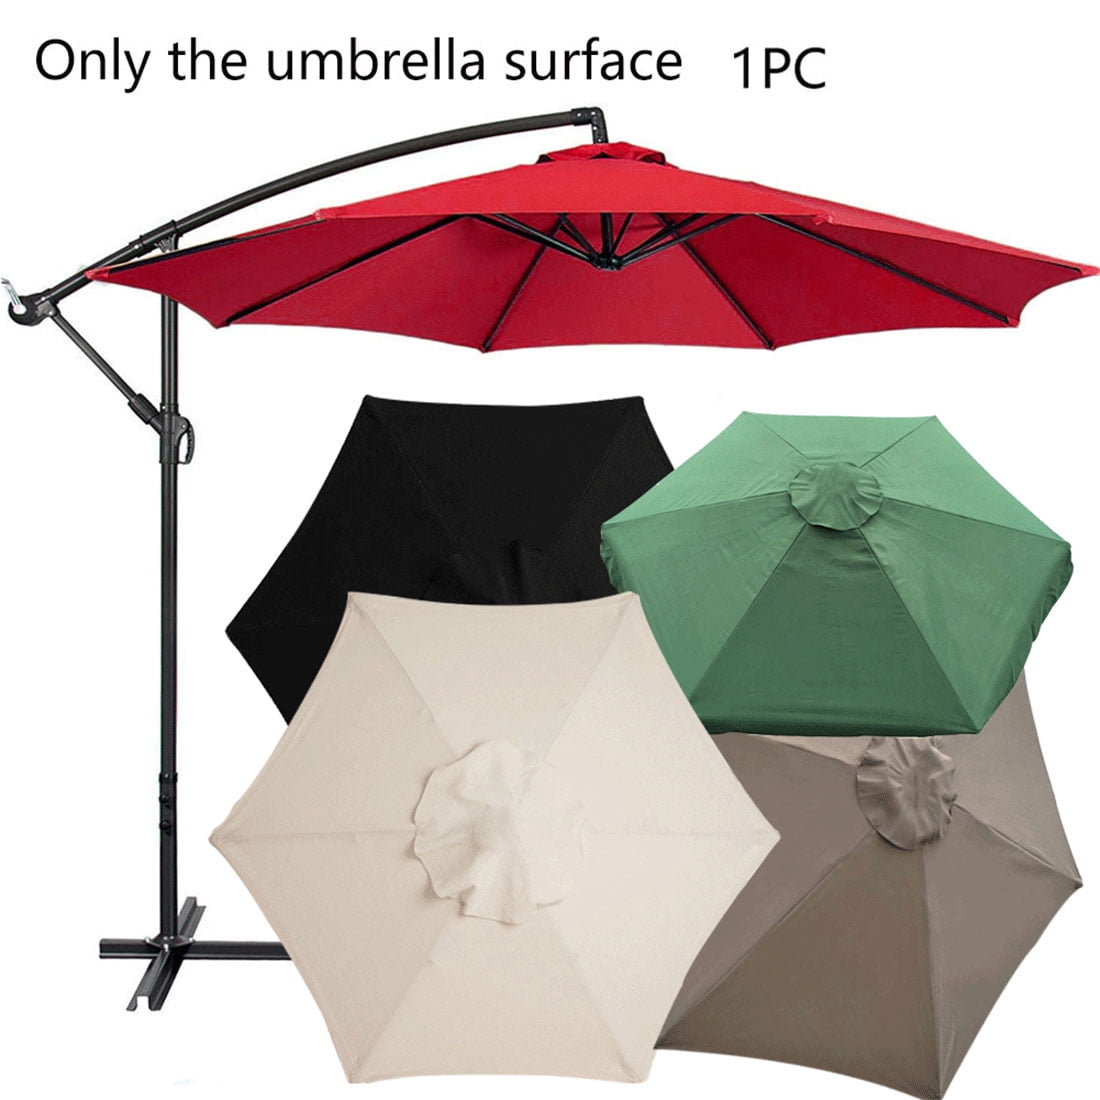 Details about   10' Umbrella Replacement Canopy 8 Rib Outdoor Patio Top Cover Waterproof 